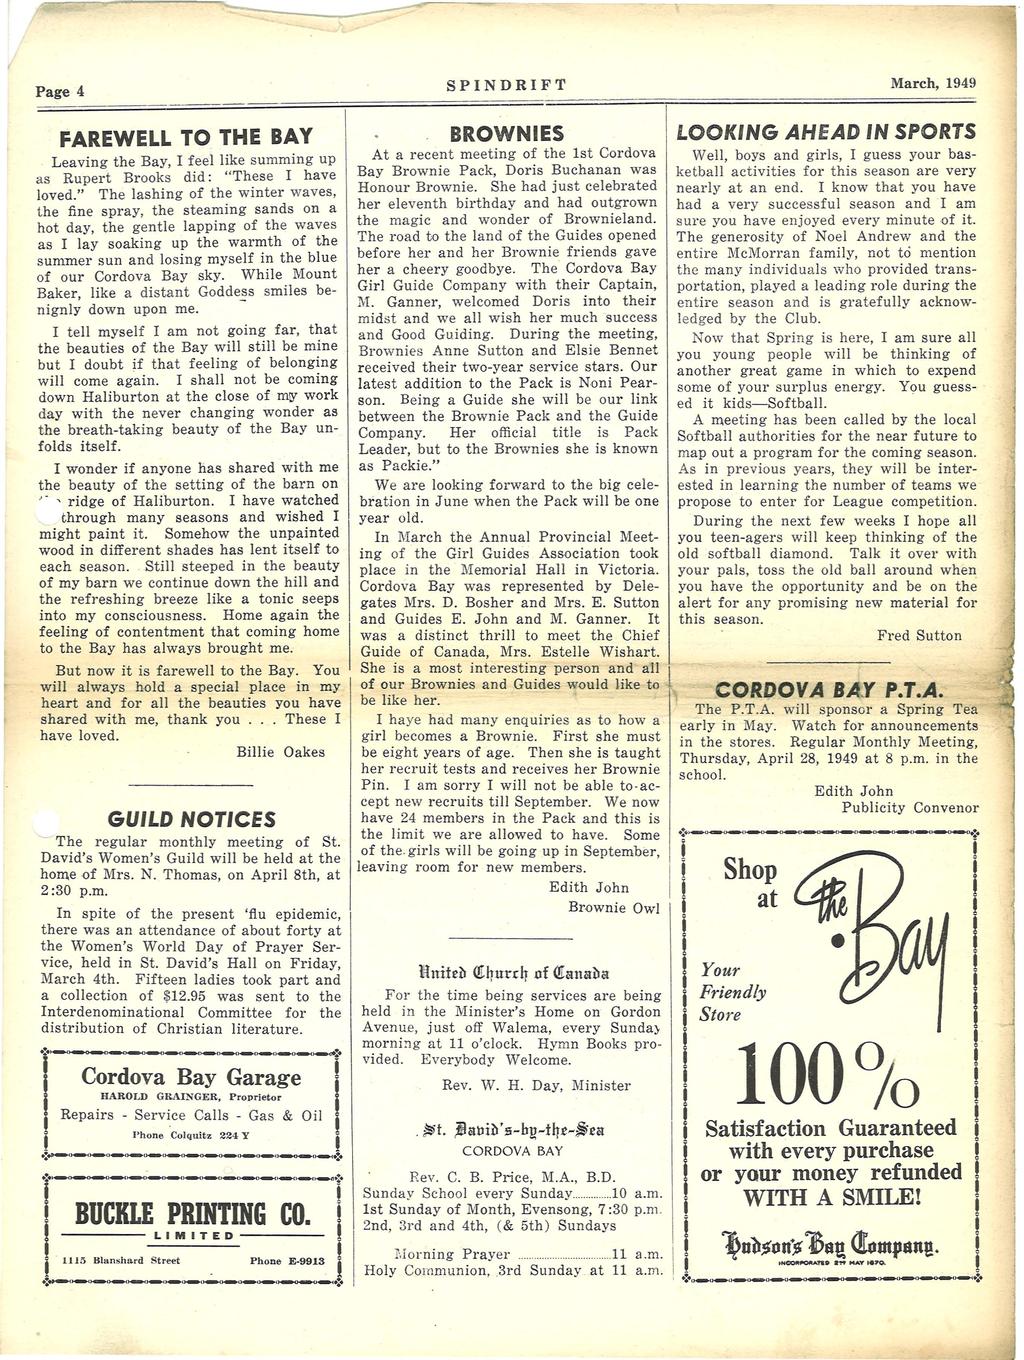 ",...-.,,--,,--..--'-----:-._~:--:--------- Page 4 SPNDRFT March,1949 FAREWELL TO THE BAY Leavng the Bay, feel lke summng up as Rupert Brooks dd: "These have loved.